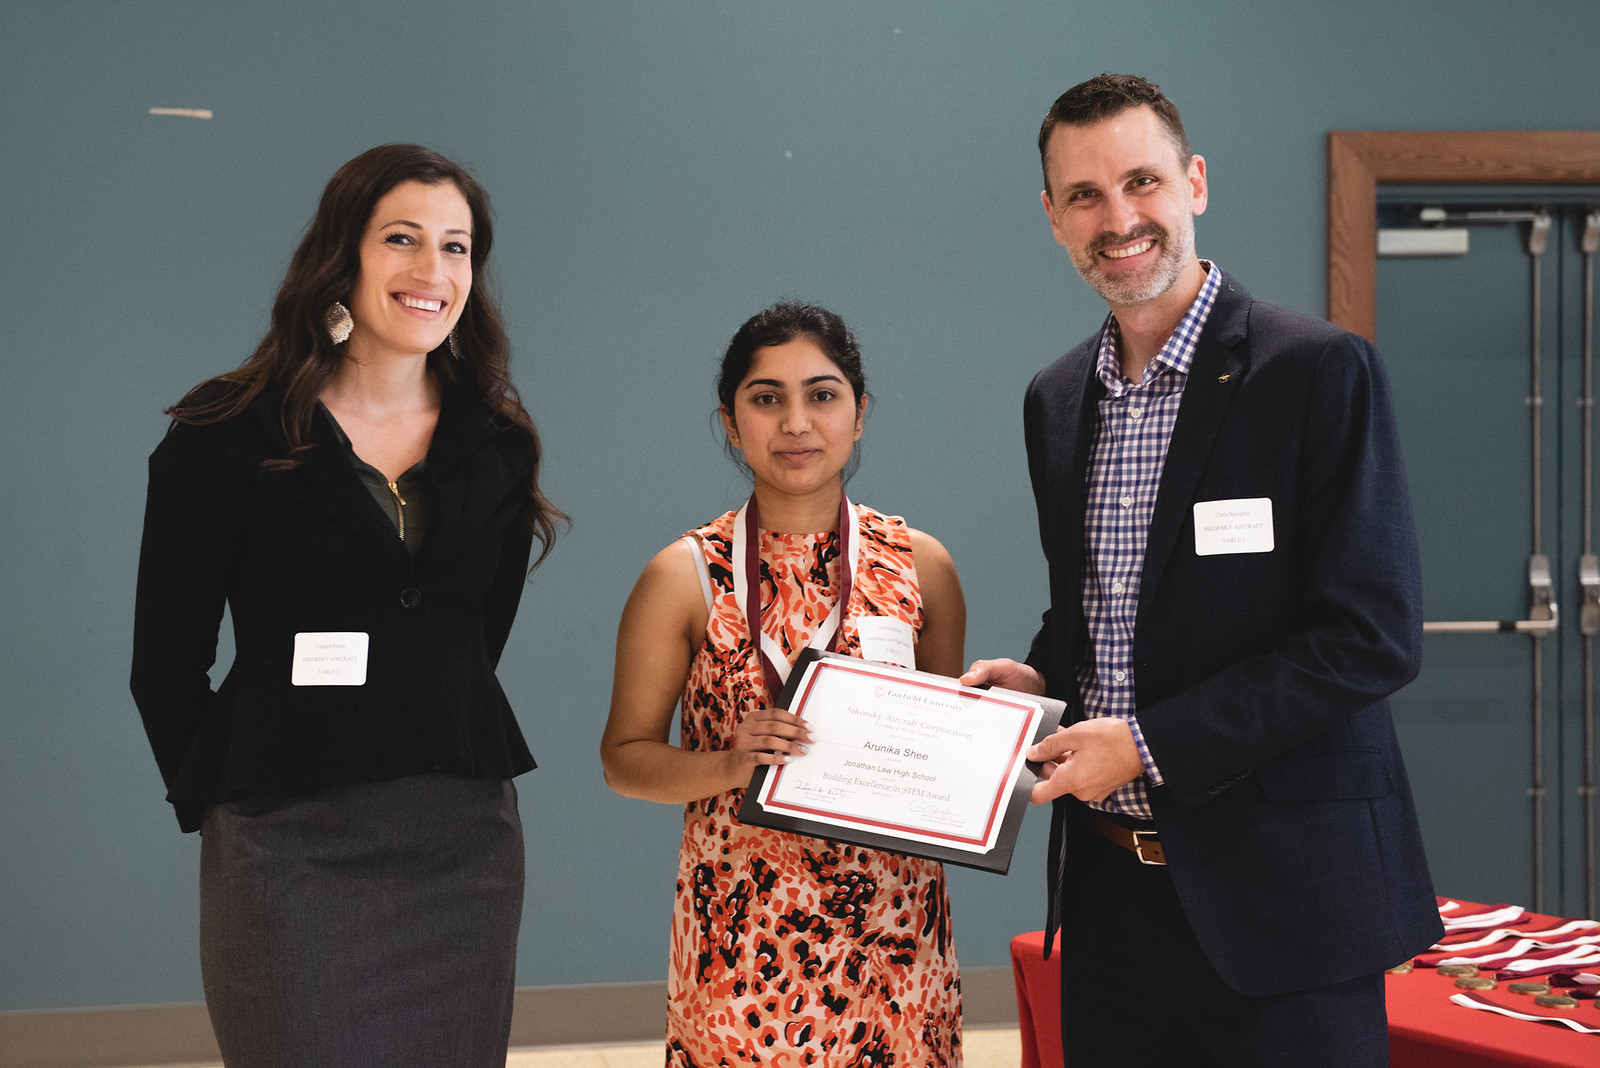 View the photos of high school students honored for excellence in STEM subjects by Fairfield University School of Engineering and Sikorsky Aircraft Corporation.